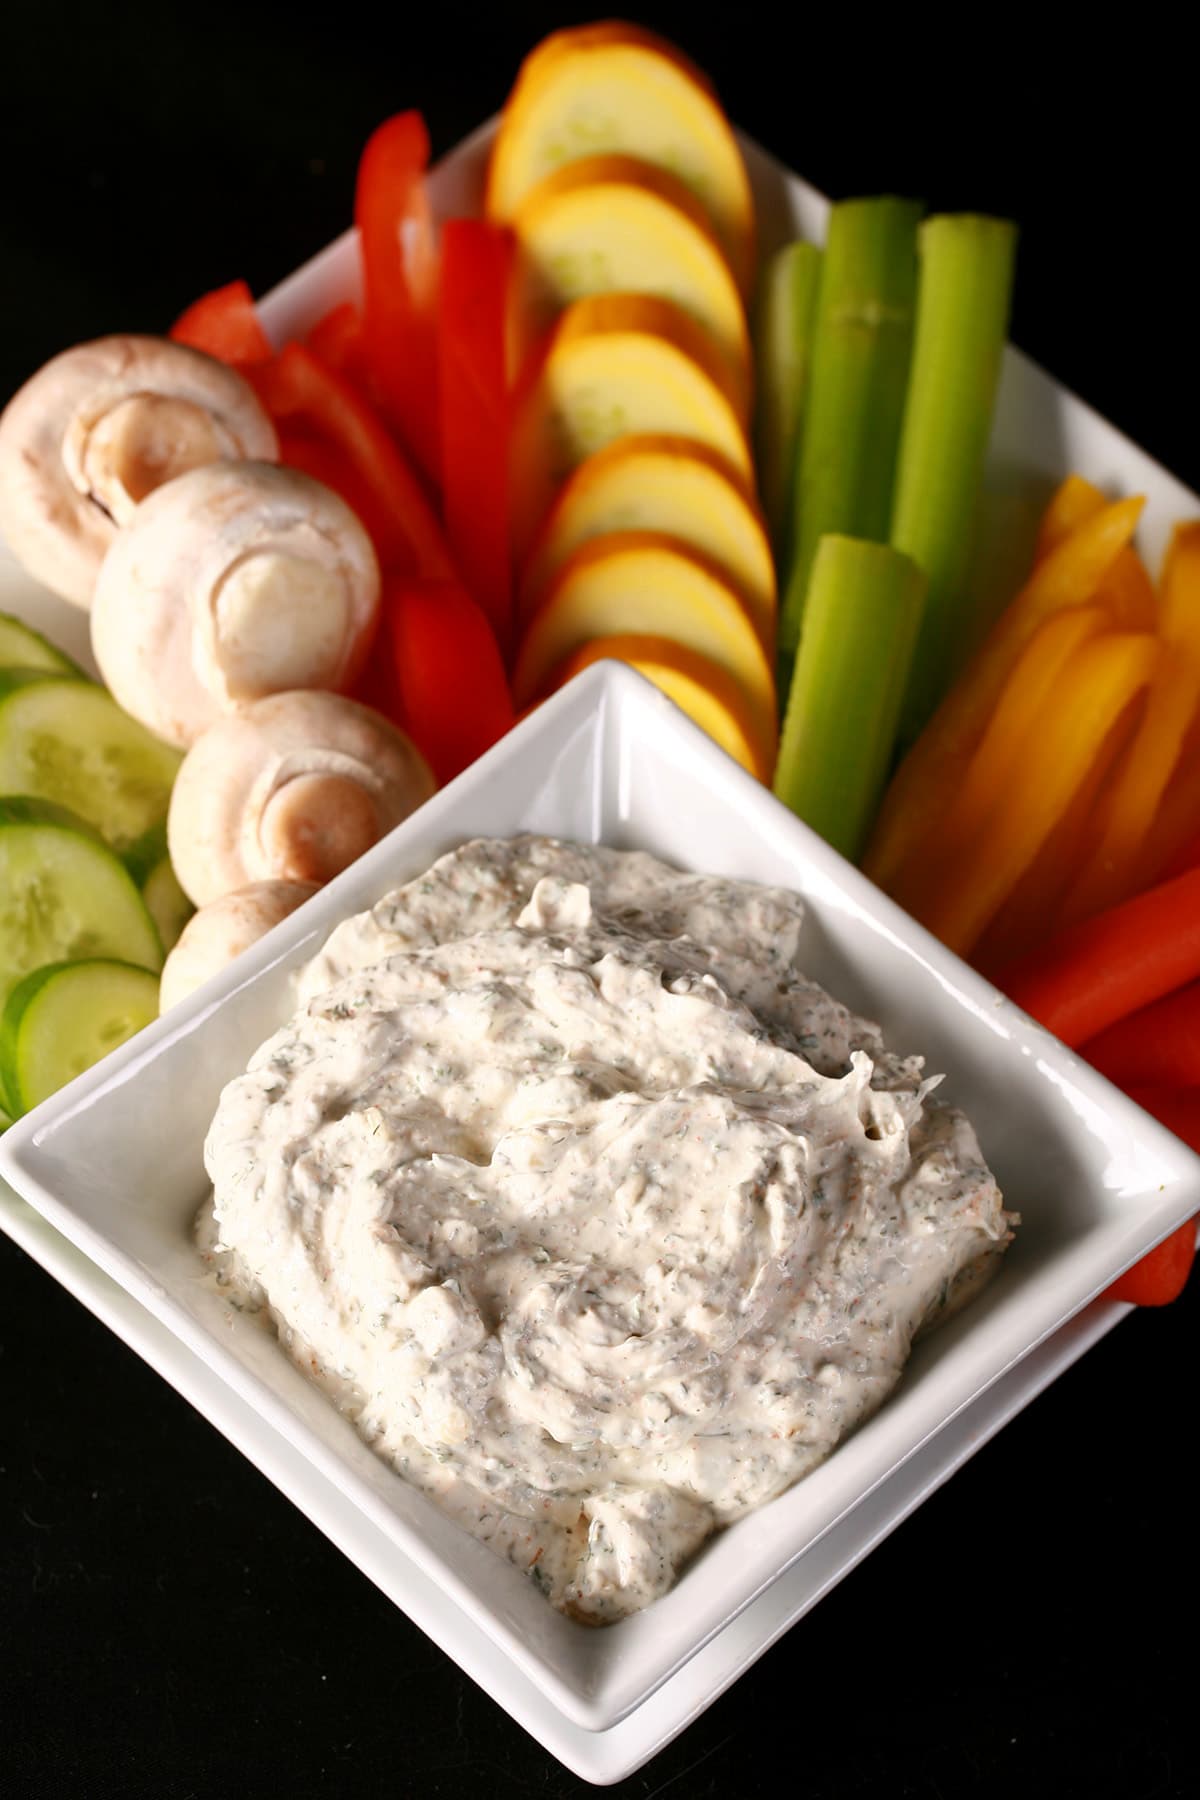 A large white square bowl of easy dill dip, on a larger plate surrounded by a variety of brightly coloured vegetable spears and slices.